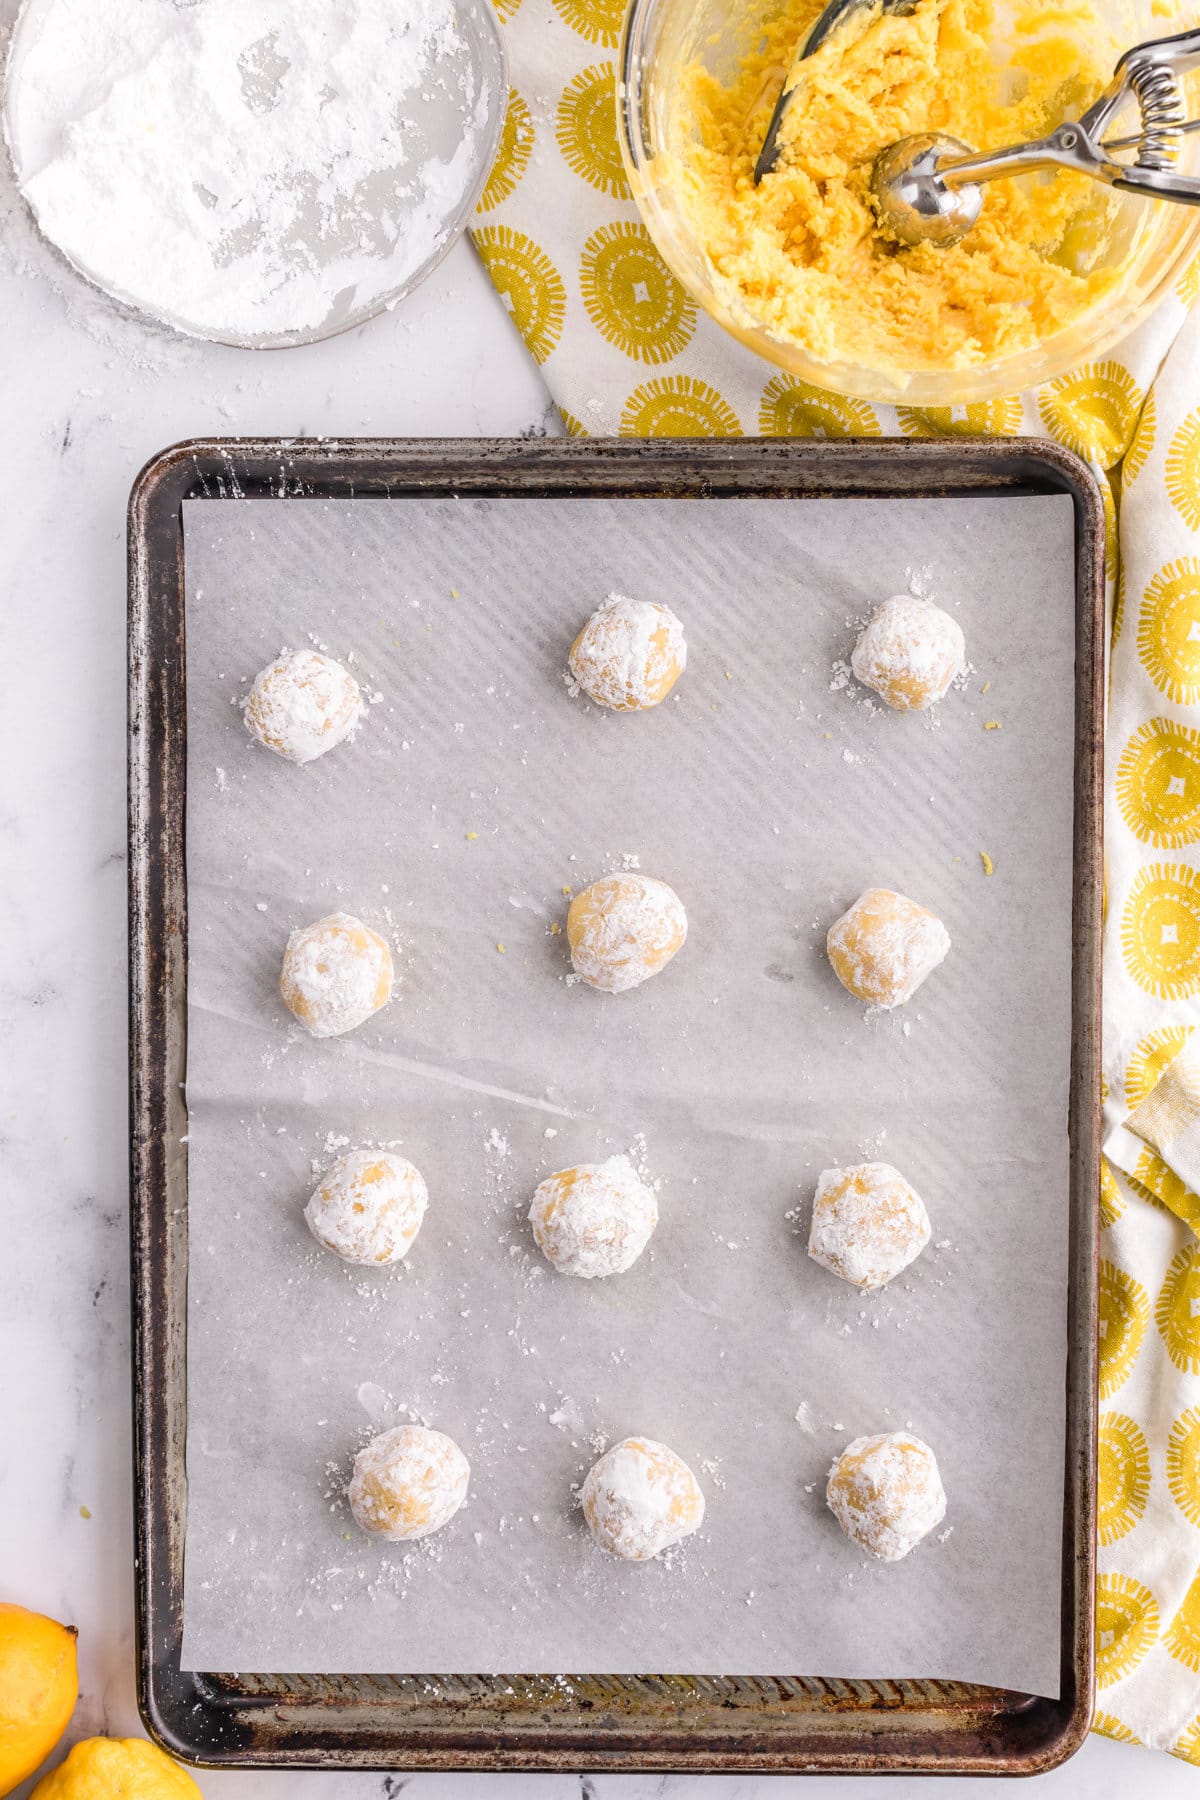 Cookie dough balls coated in powdered sugar on lined baking sheet.